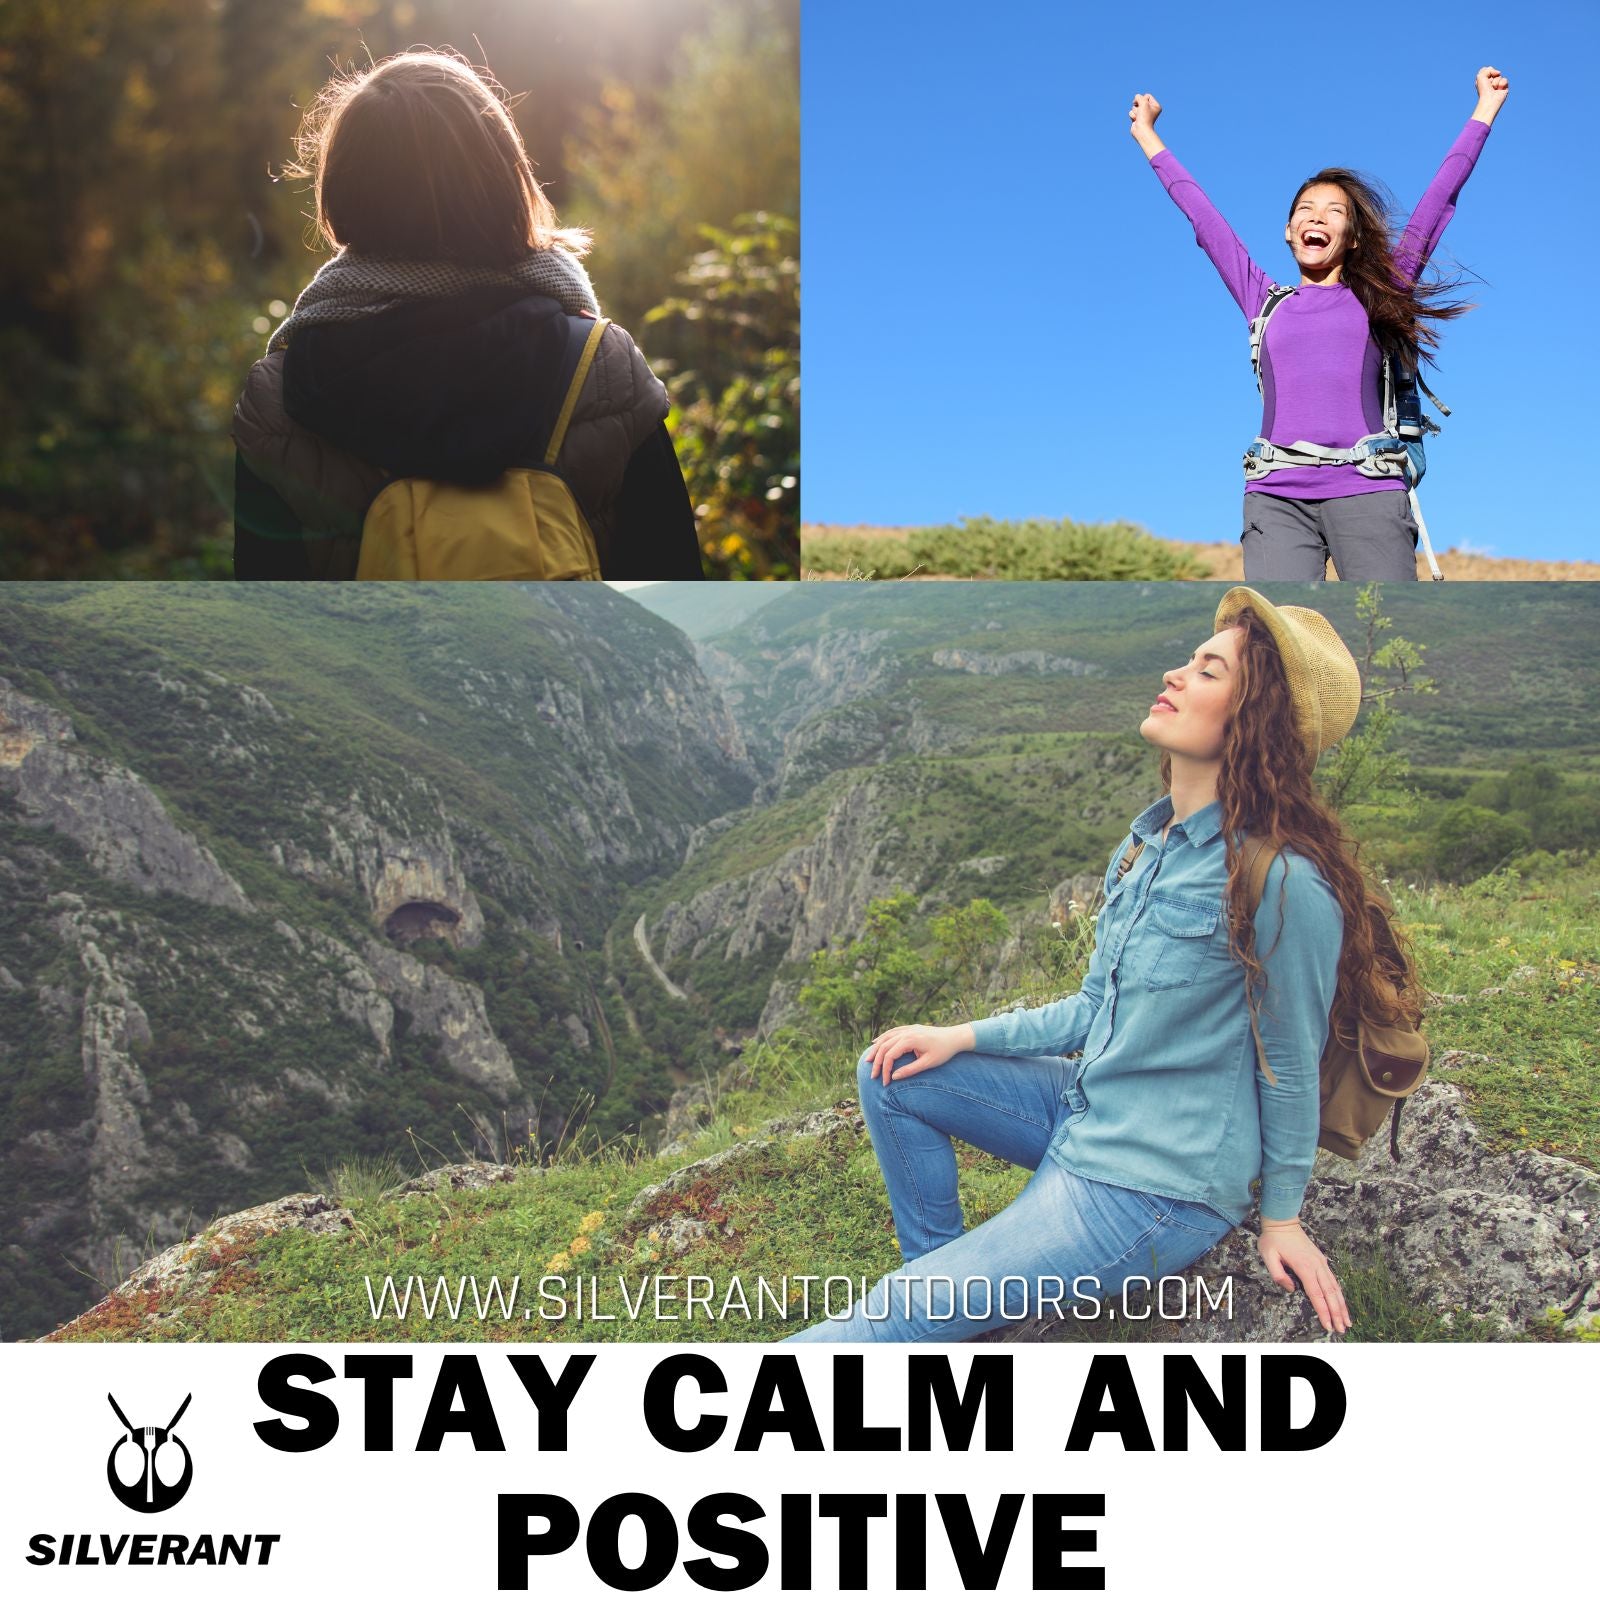 Stay calm and positive - SilverAnt Outdoors